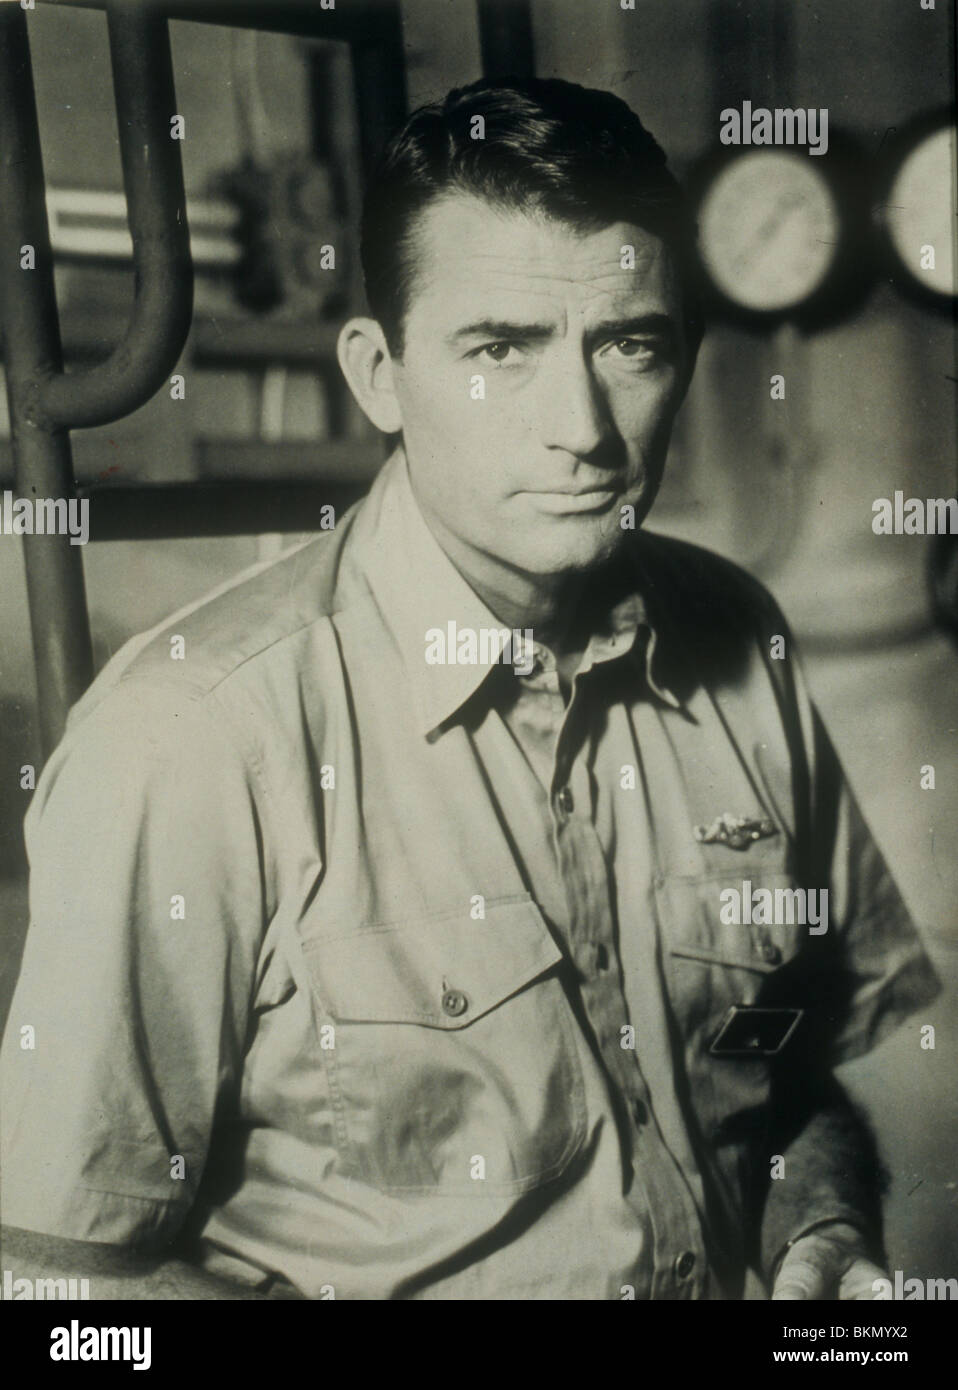 ON THE BEACH -1959 GREGORY PECK Stock Photo